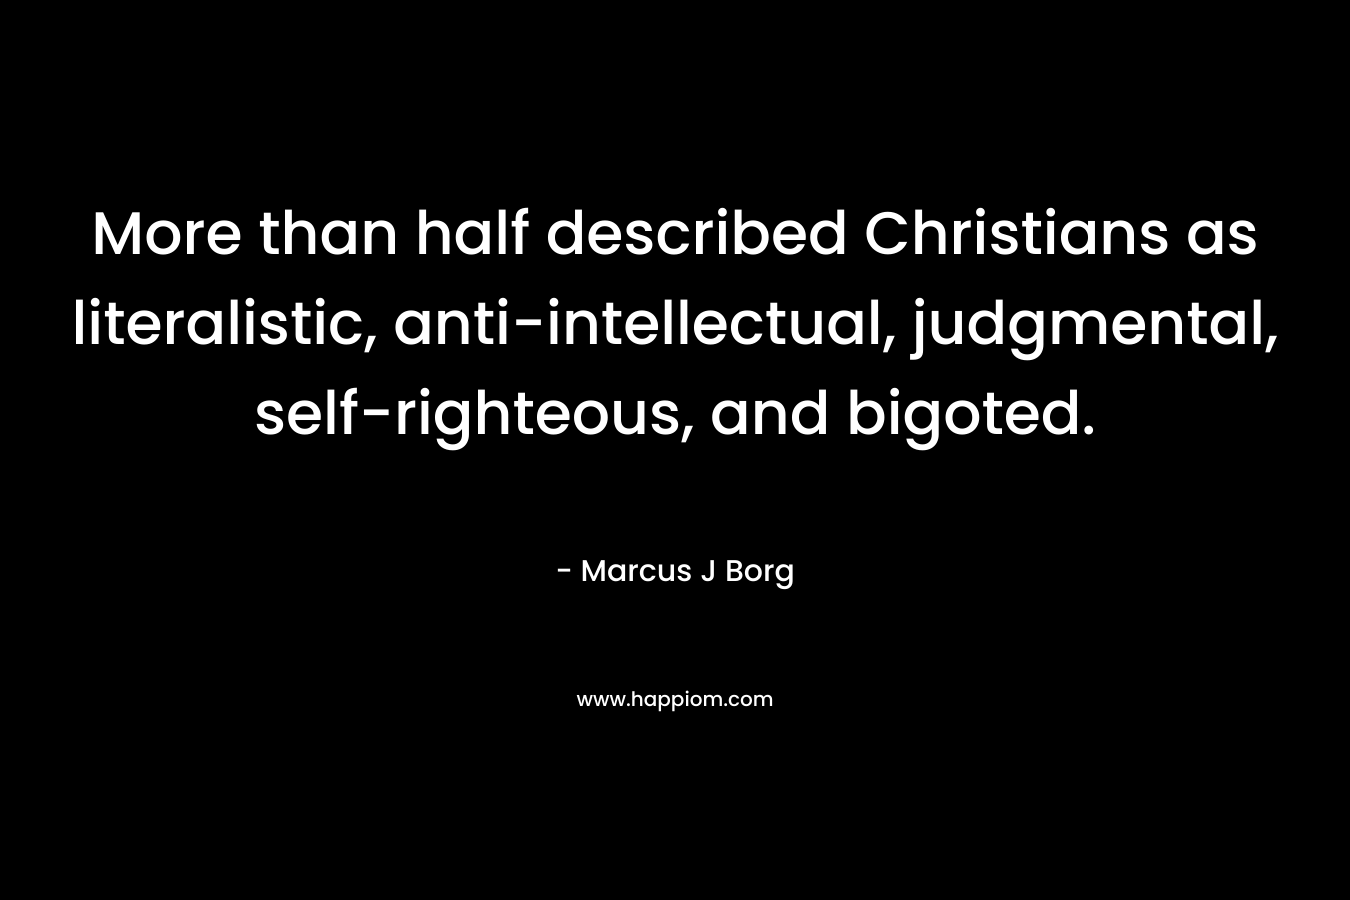 More than half described Christians as literalistic, anti-intellectual, judgmental, self-righteous, and bigoted. – Marcus J Borg